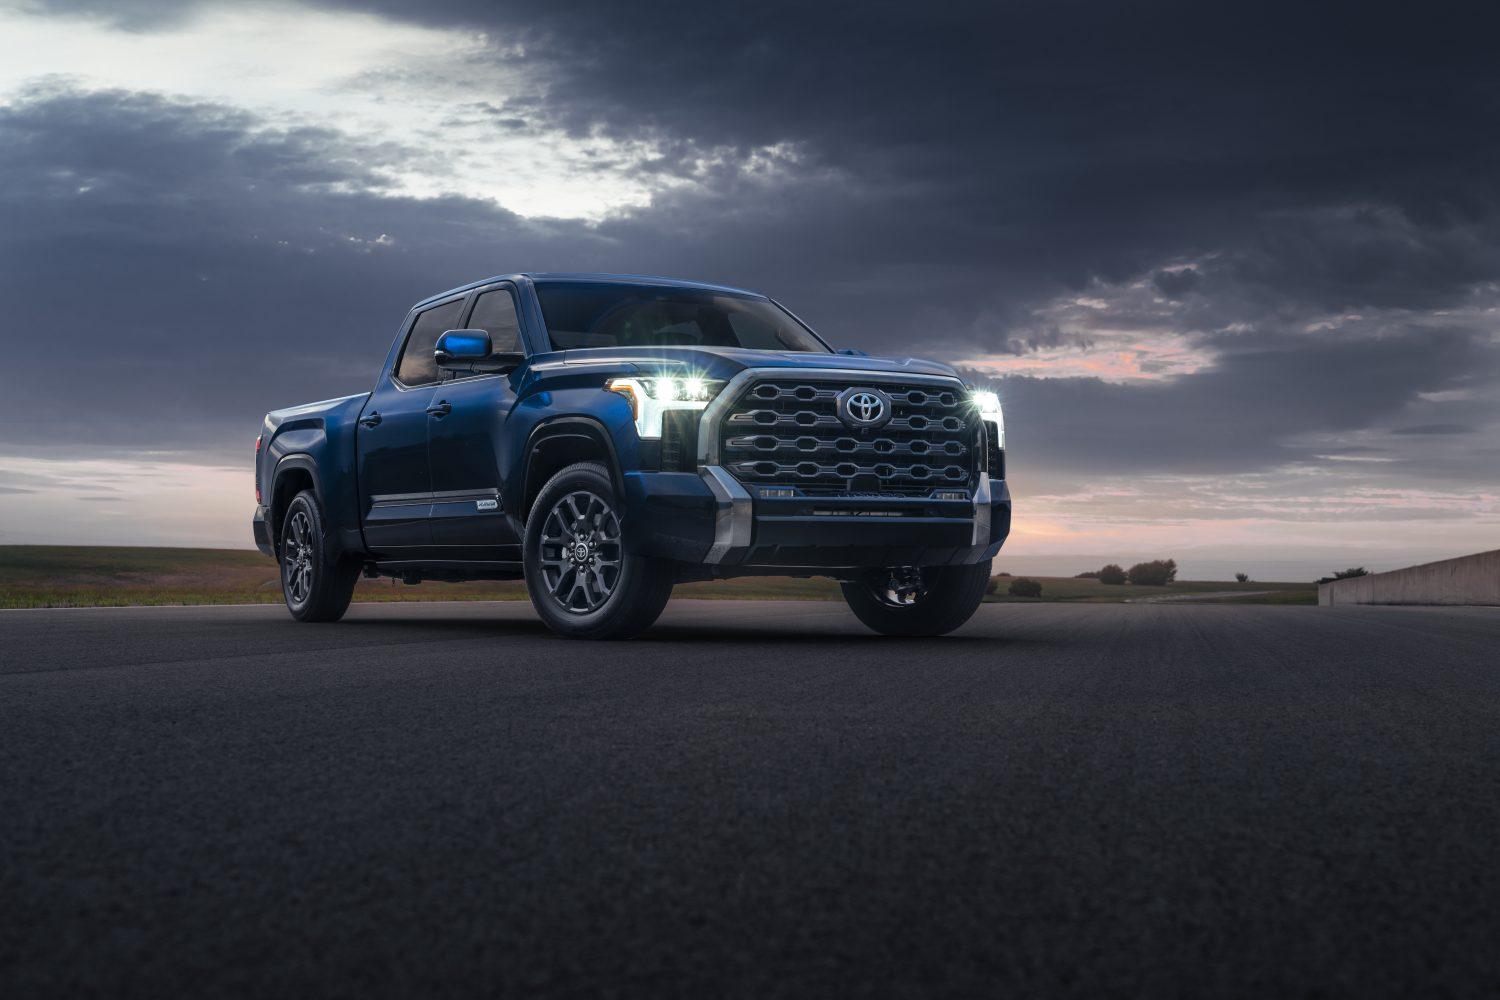 The 2022 Toyota Tundra faces off against the Chevy Silverado 1500.